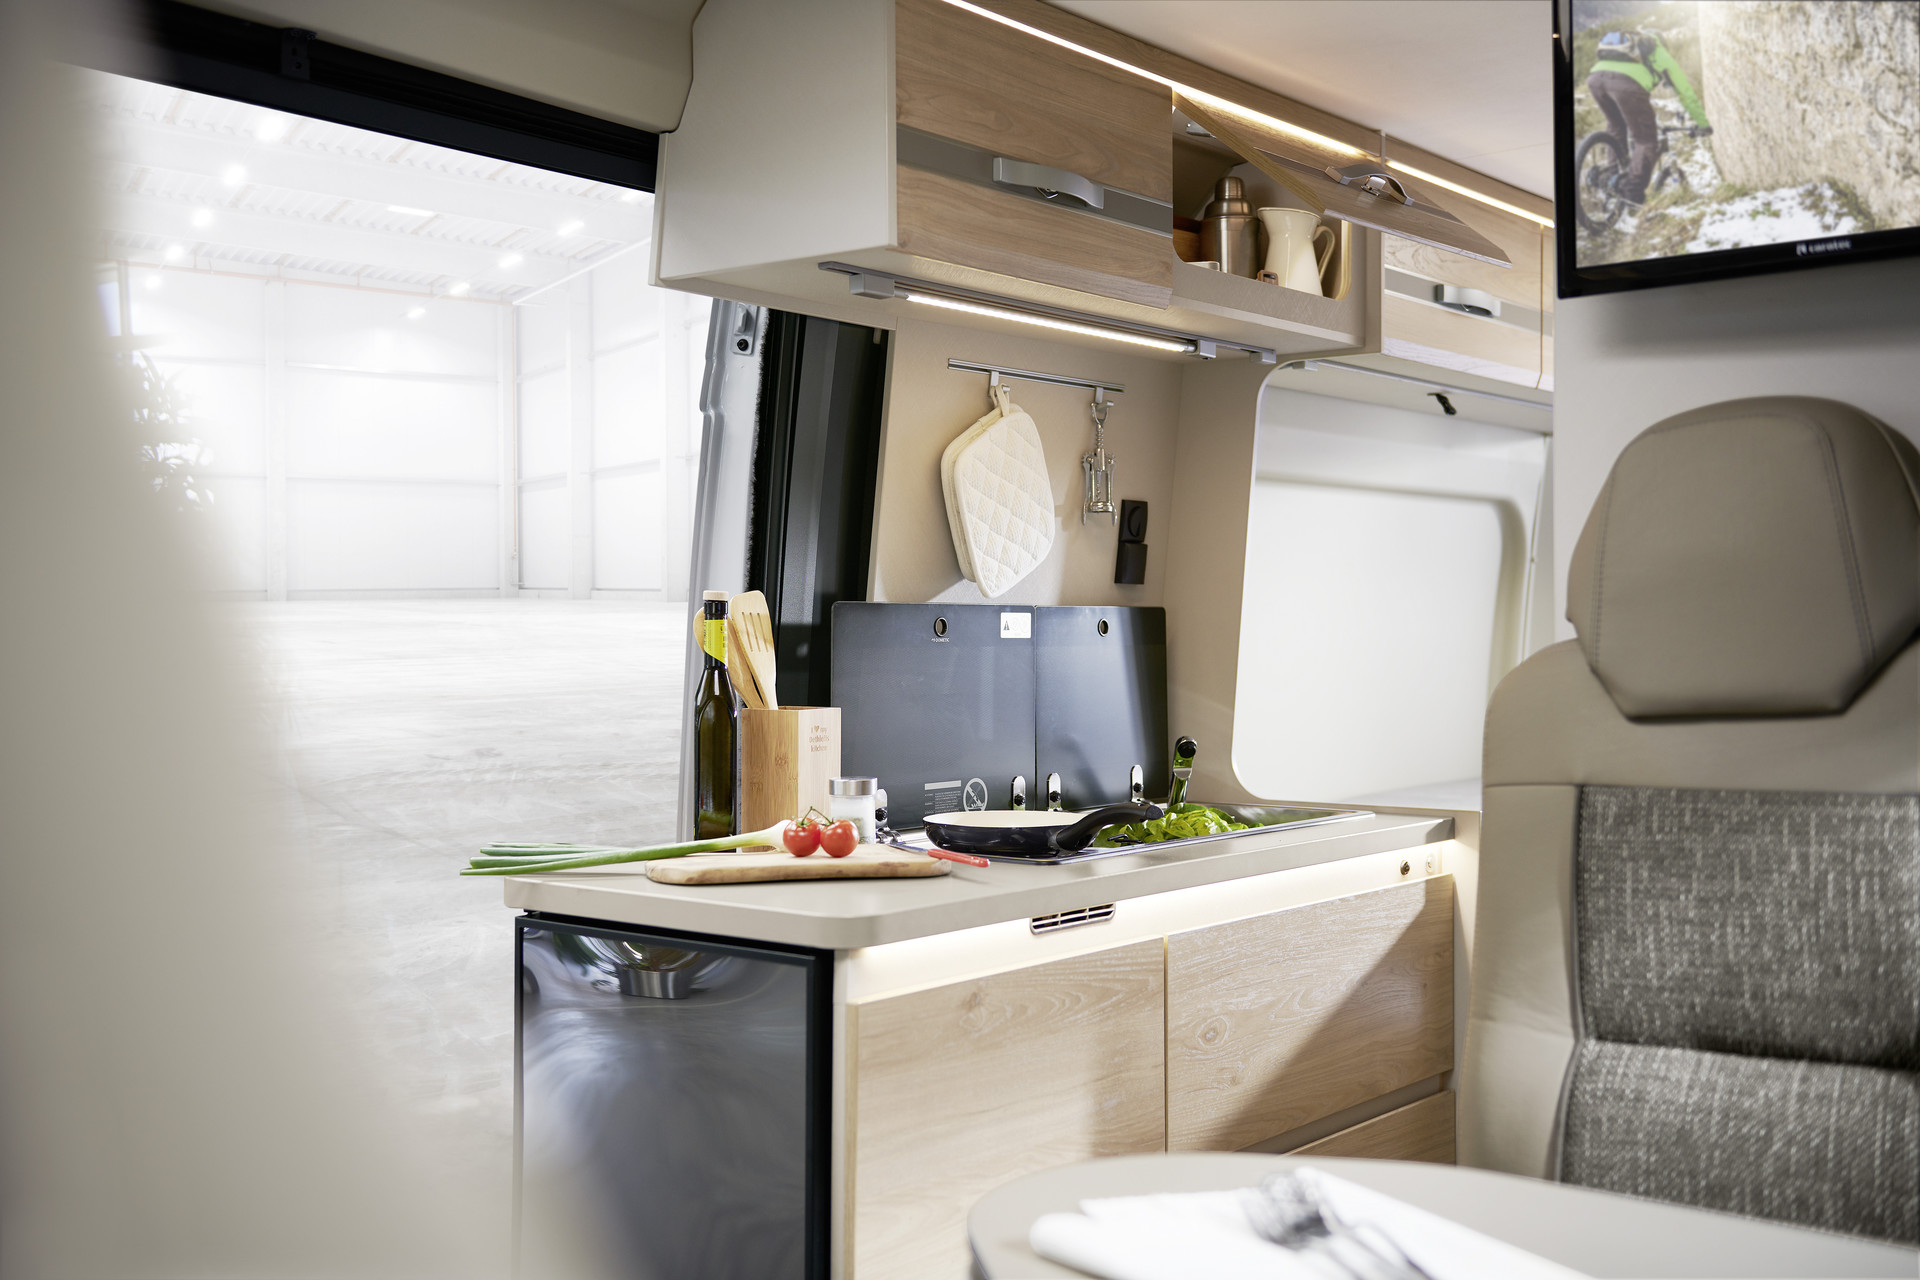 Enjoy some (mobile) home cooking. The kitchen makes optimal use of the available space. Thanks to a door that opens 180°, the large fridge is easily accessible from both outside and inside the vehicle